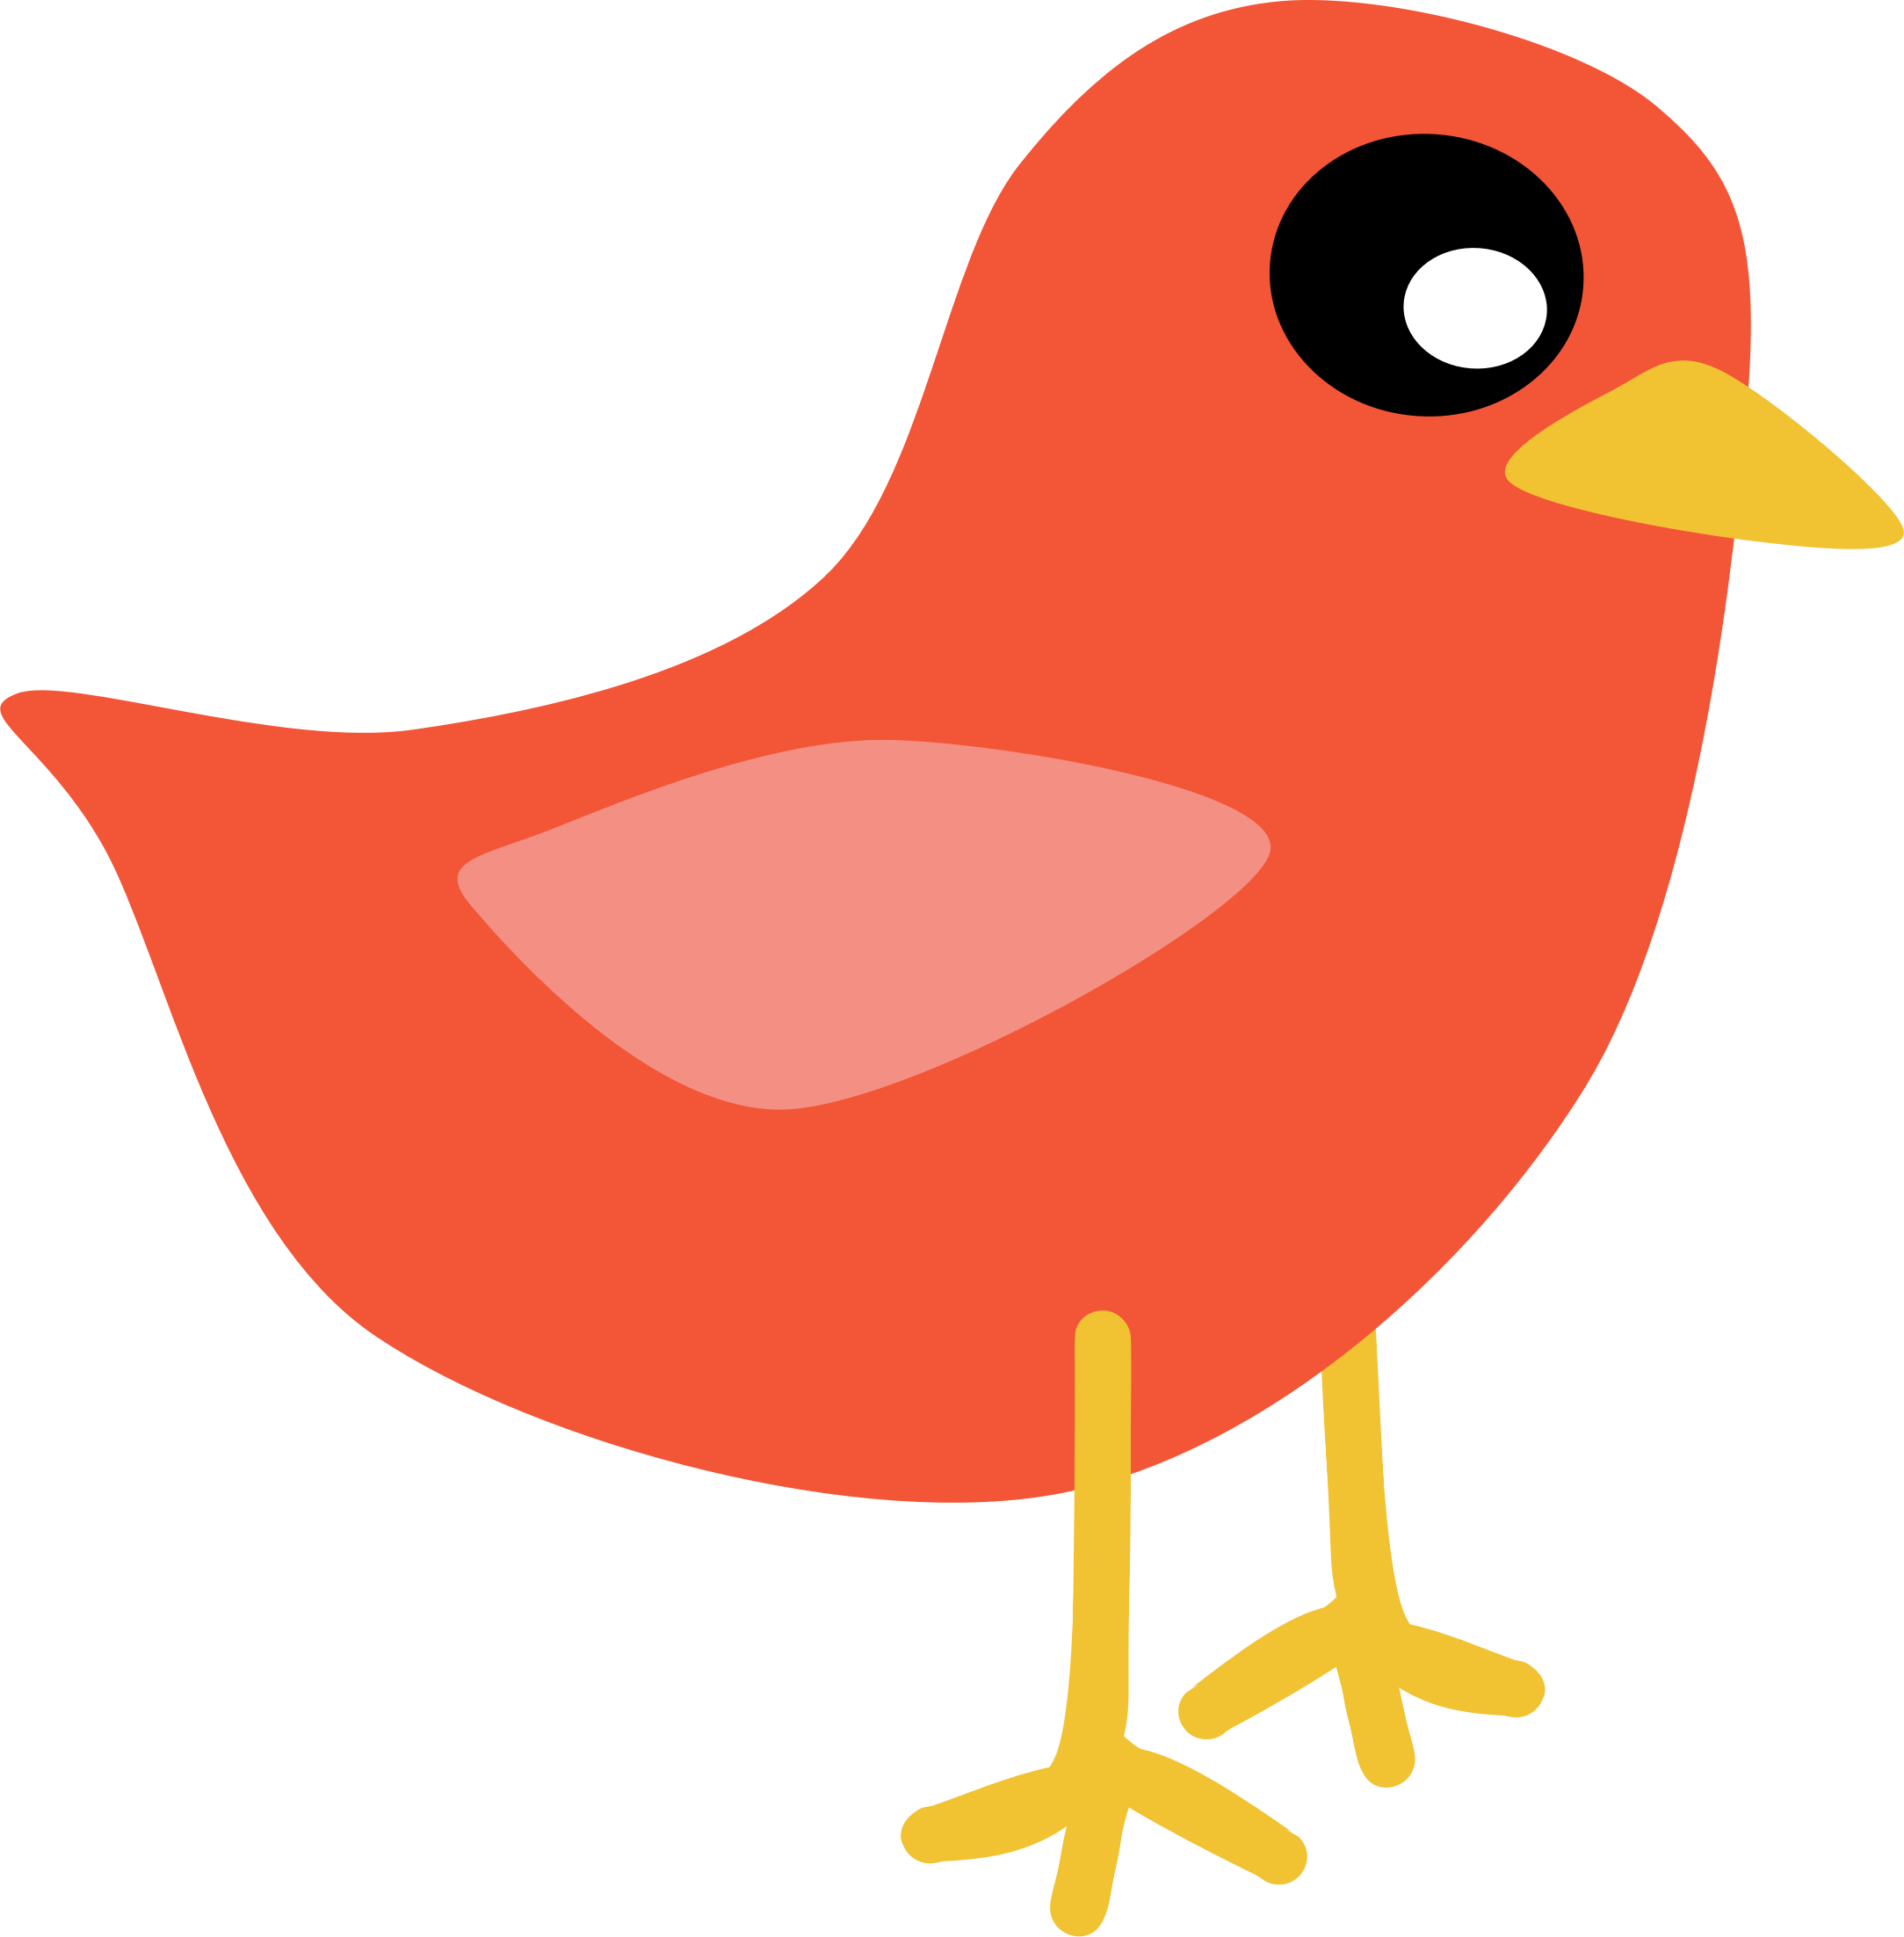 Red Bird By Scout - Little Bird Told Me Idiom (2167x2204)